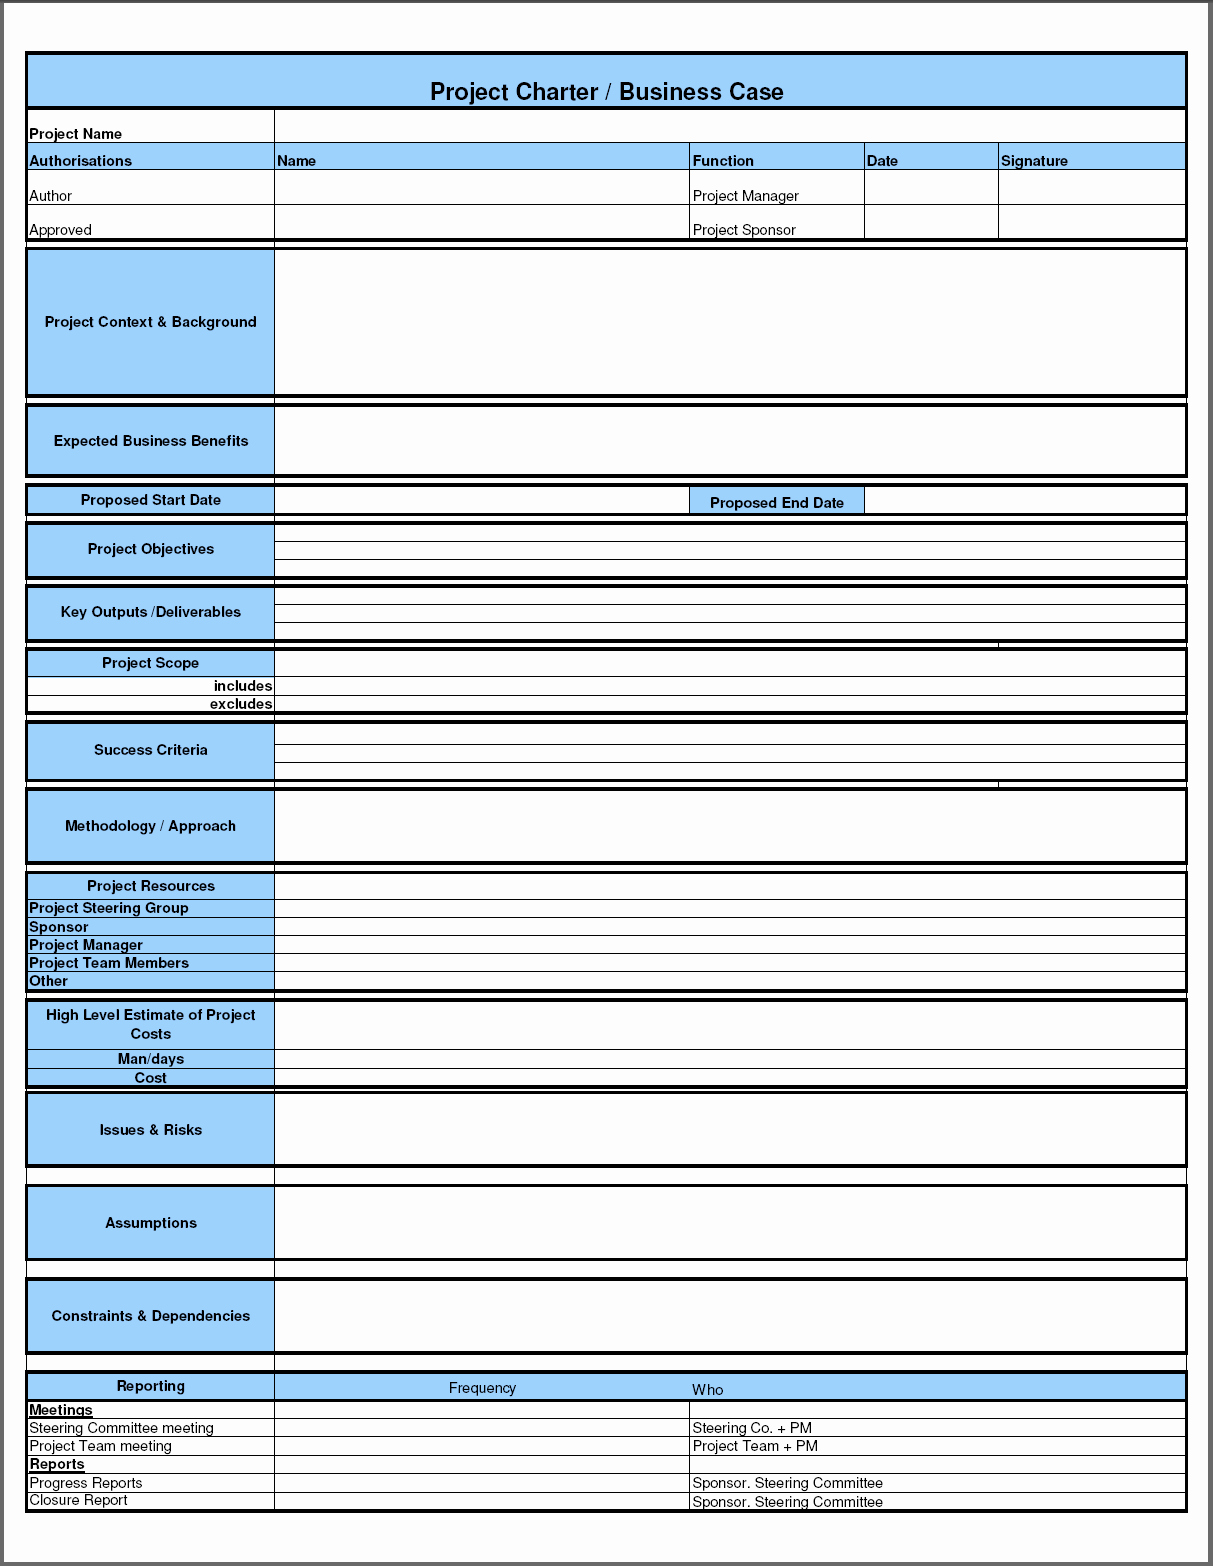 Chart Project Charter Template